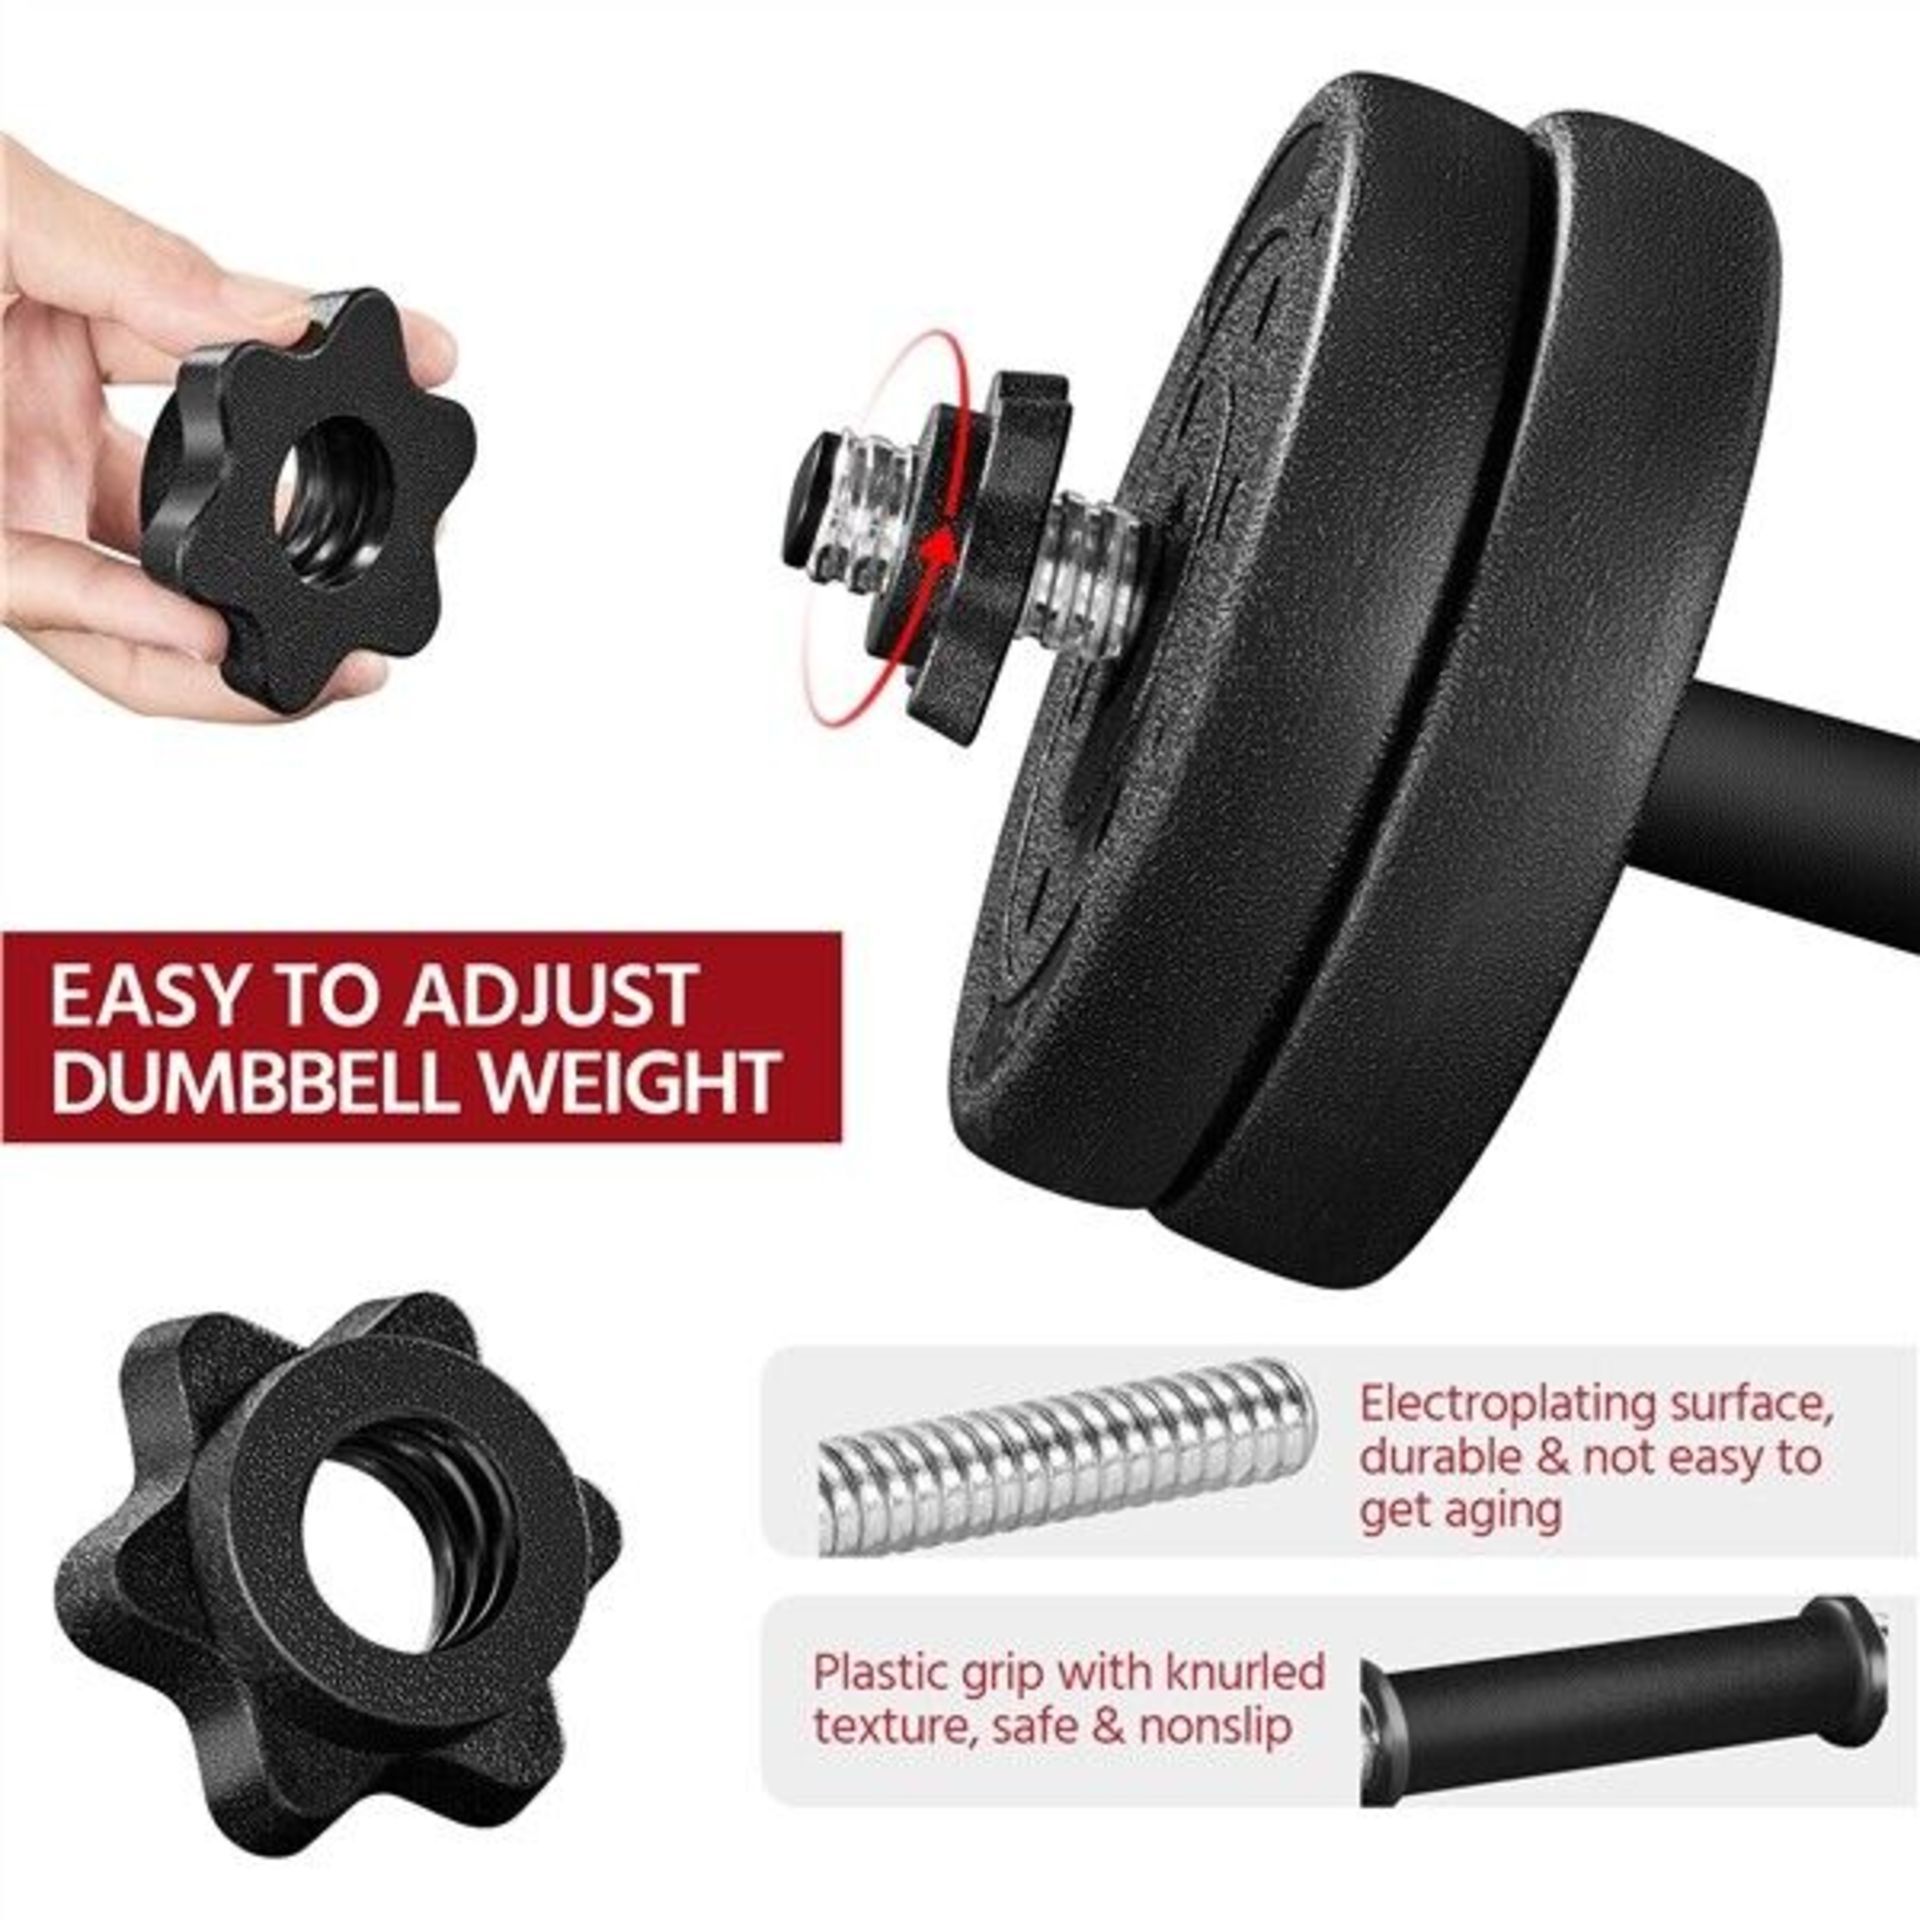 5 x SETS OF 2 - 20KG ADJUSTABLE WEIGHT DUMBBELL SETS. EACH SET INCLUDES: 4 X 3KG WEIGHTS, 2 X 2. - Image 4 of 8